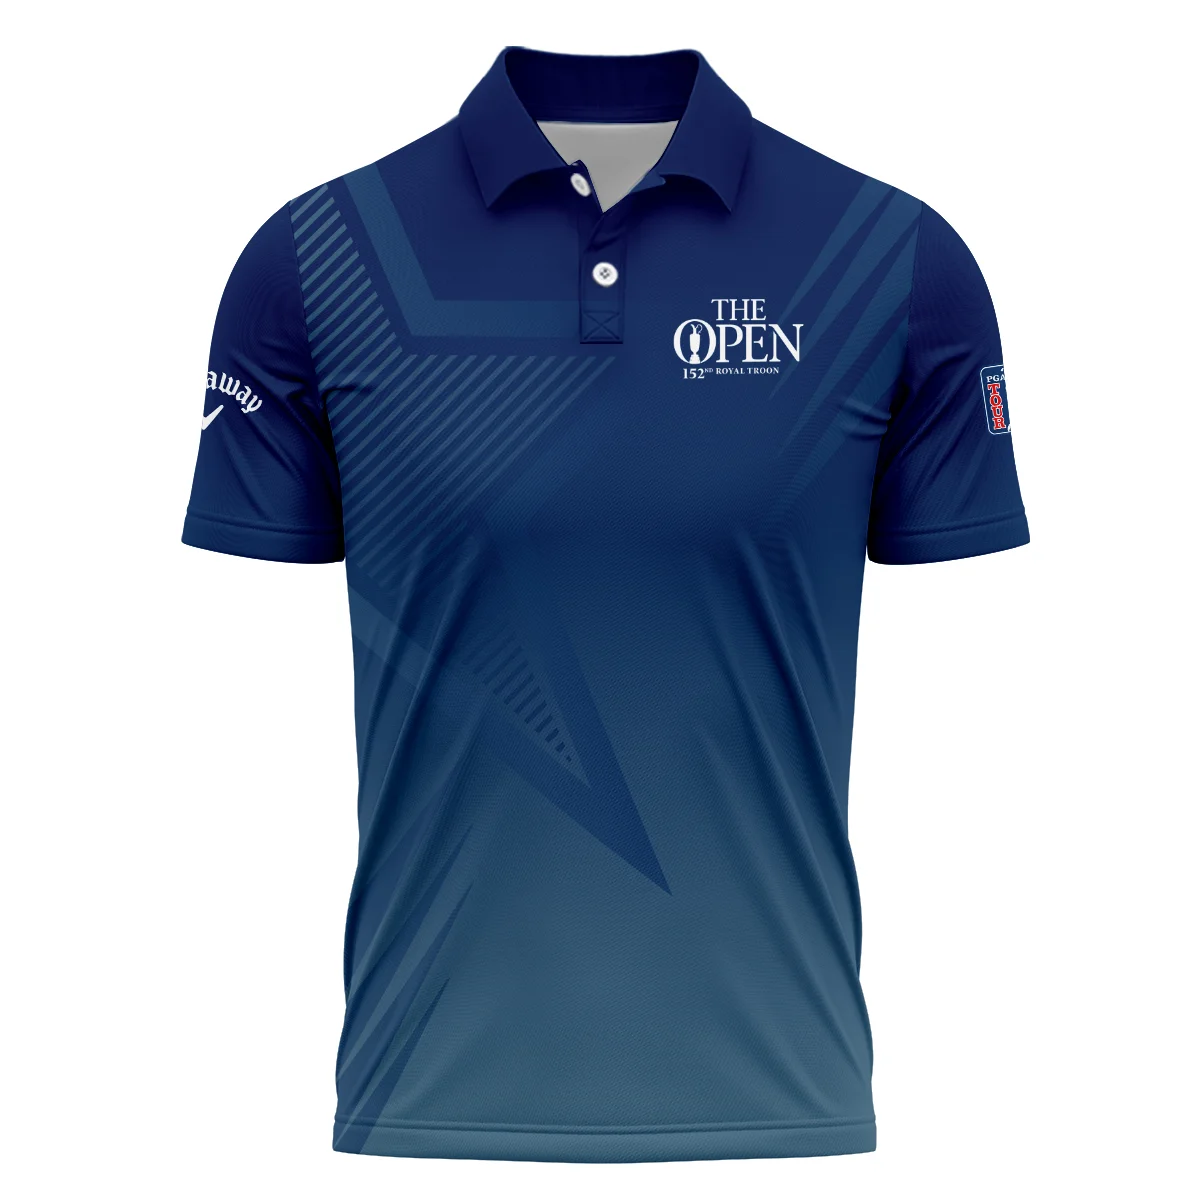 Callaway 152nd Open Championship Abstract Background Dark Blue Gradient Star Line Polo Shirt All Over Prints HOTOP260624A04CLWPL